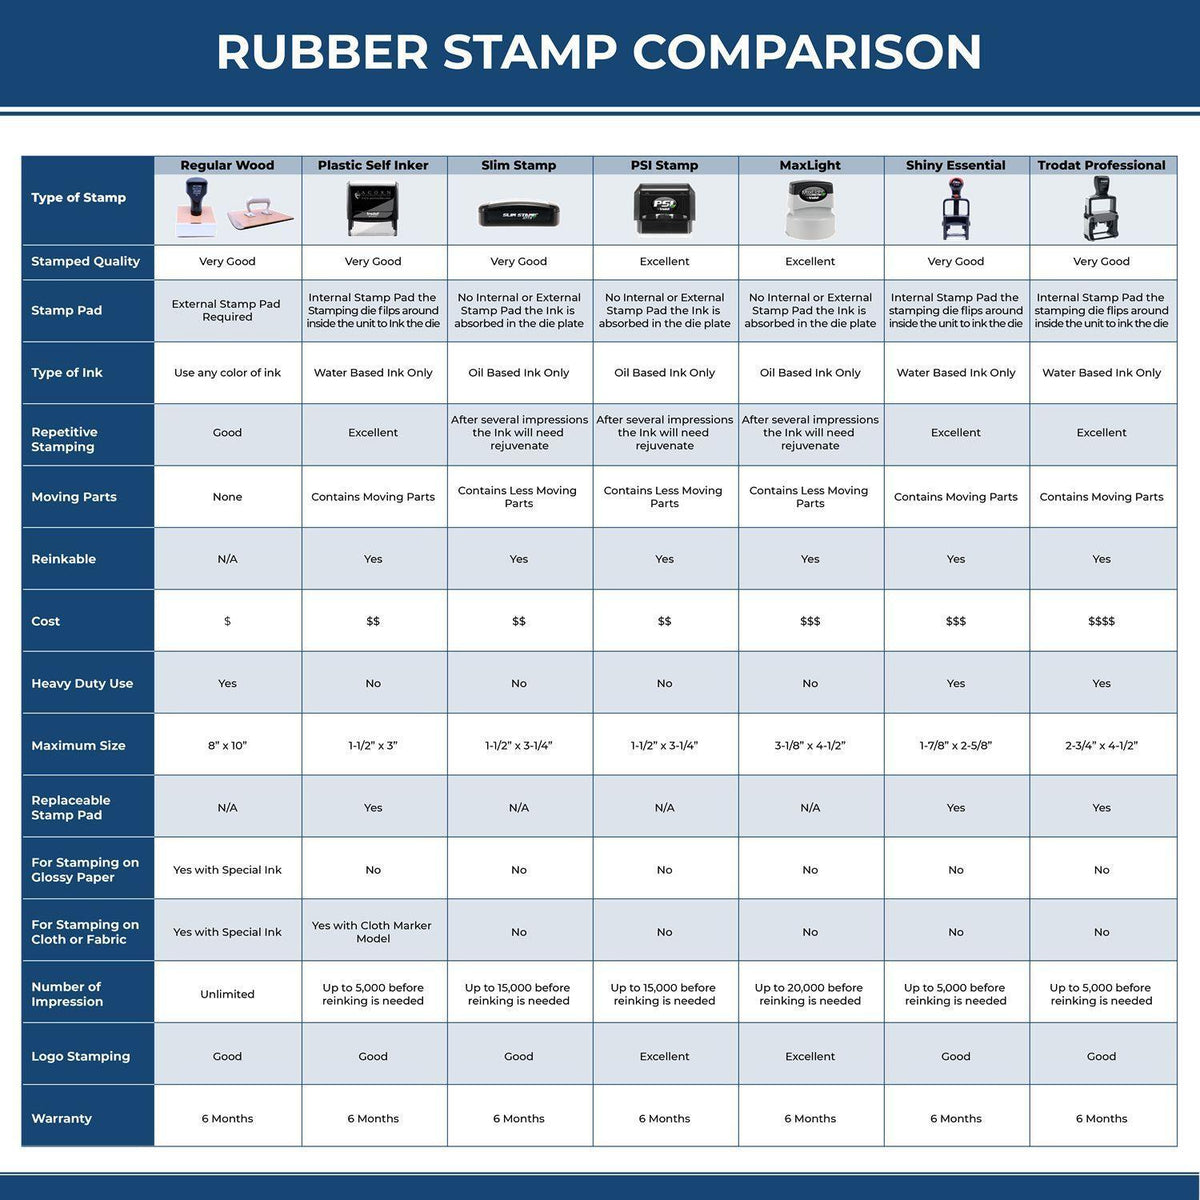 Large Appraisal Rubber Stamp 4559R Rubber Stamp Comparison